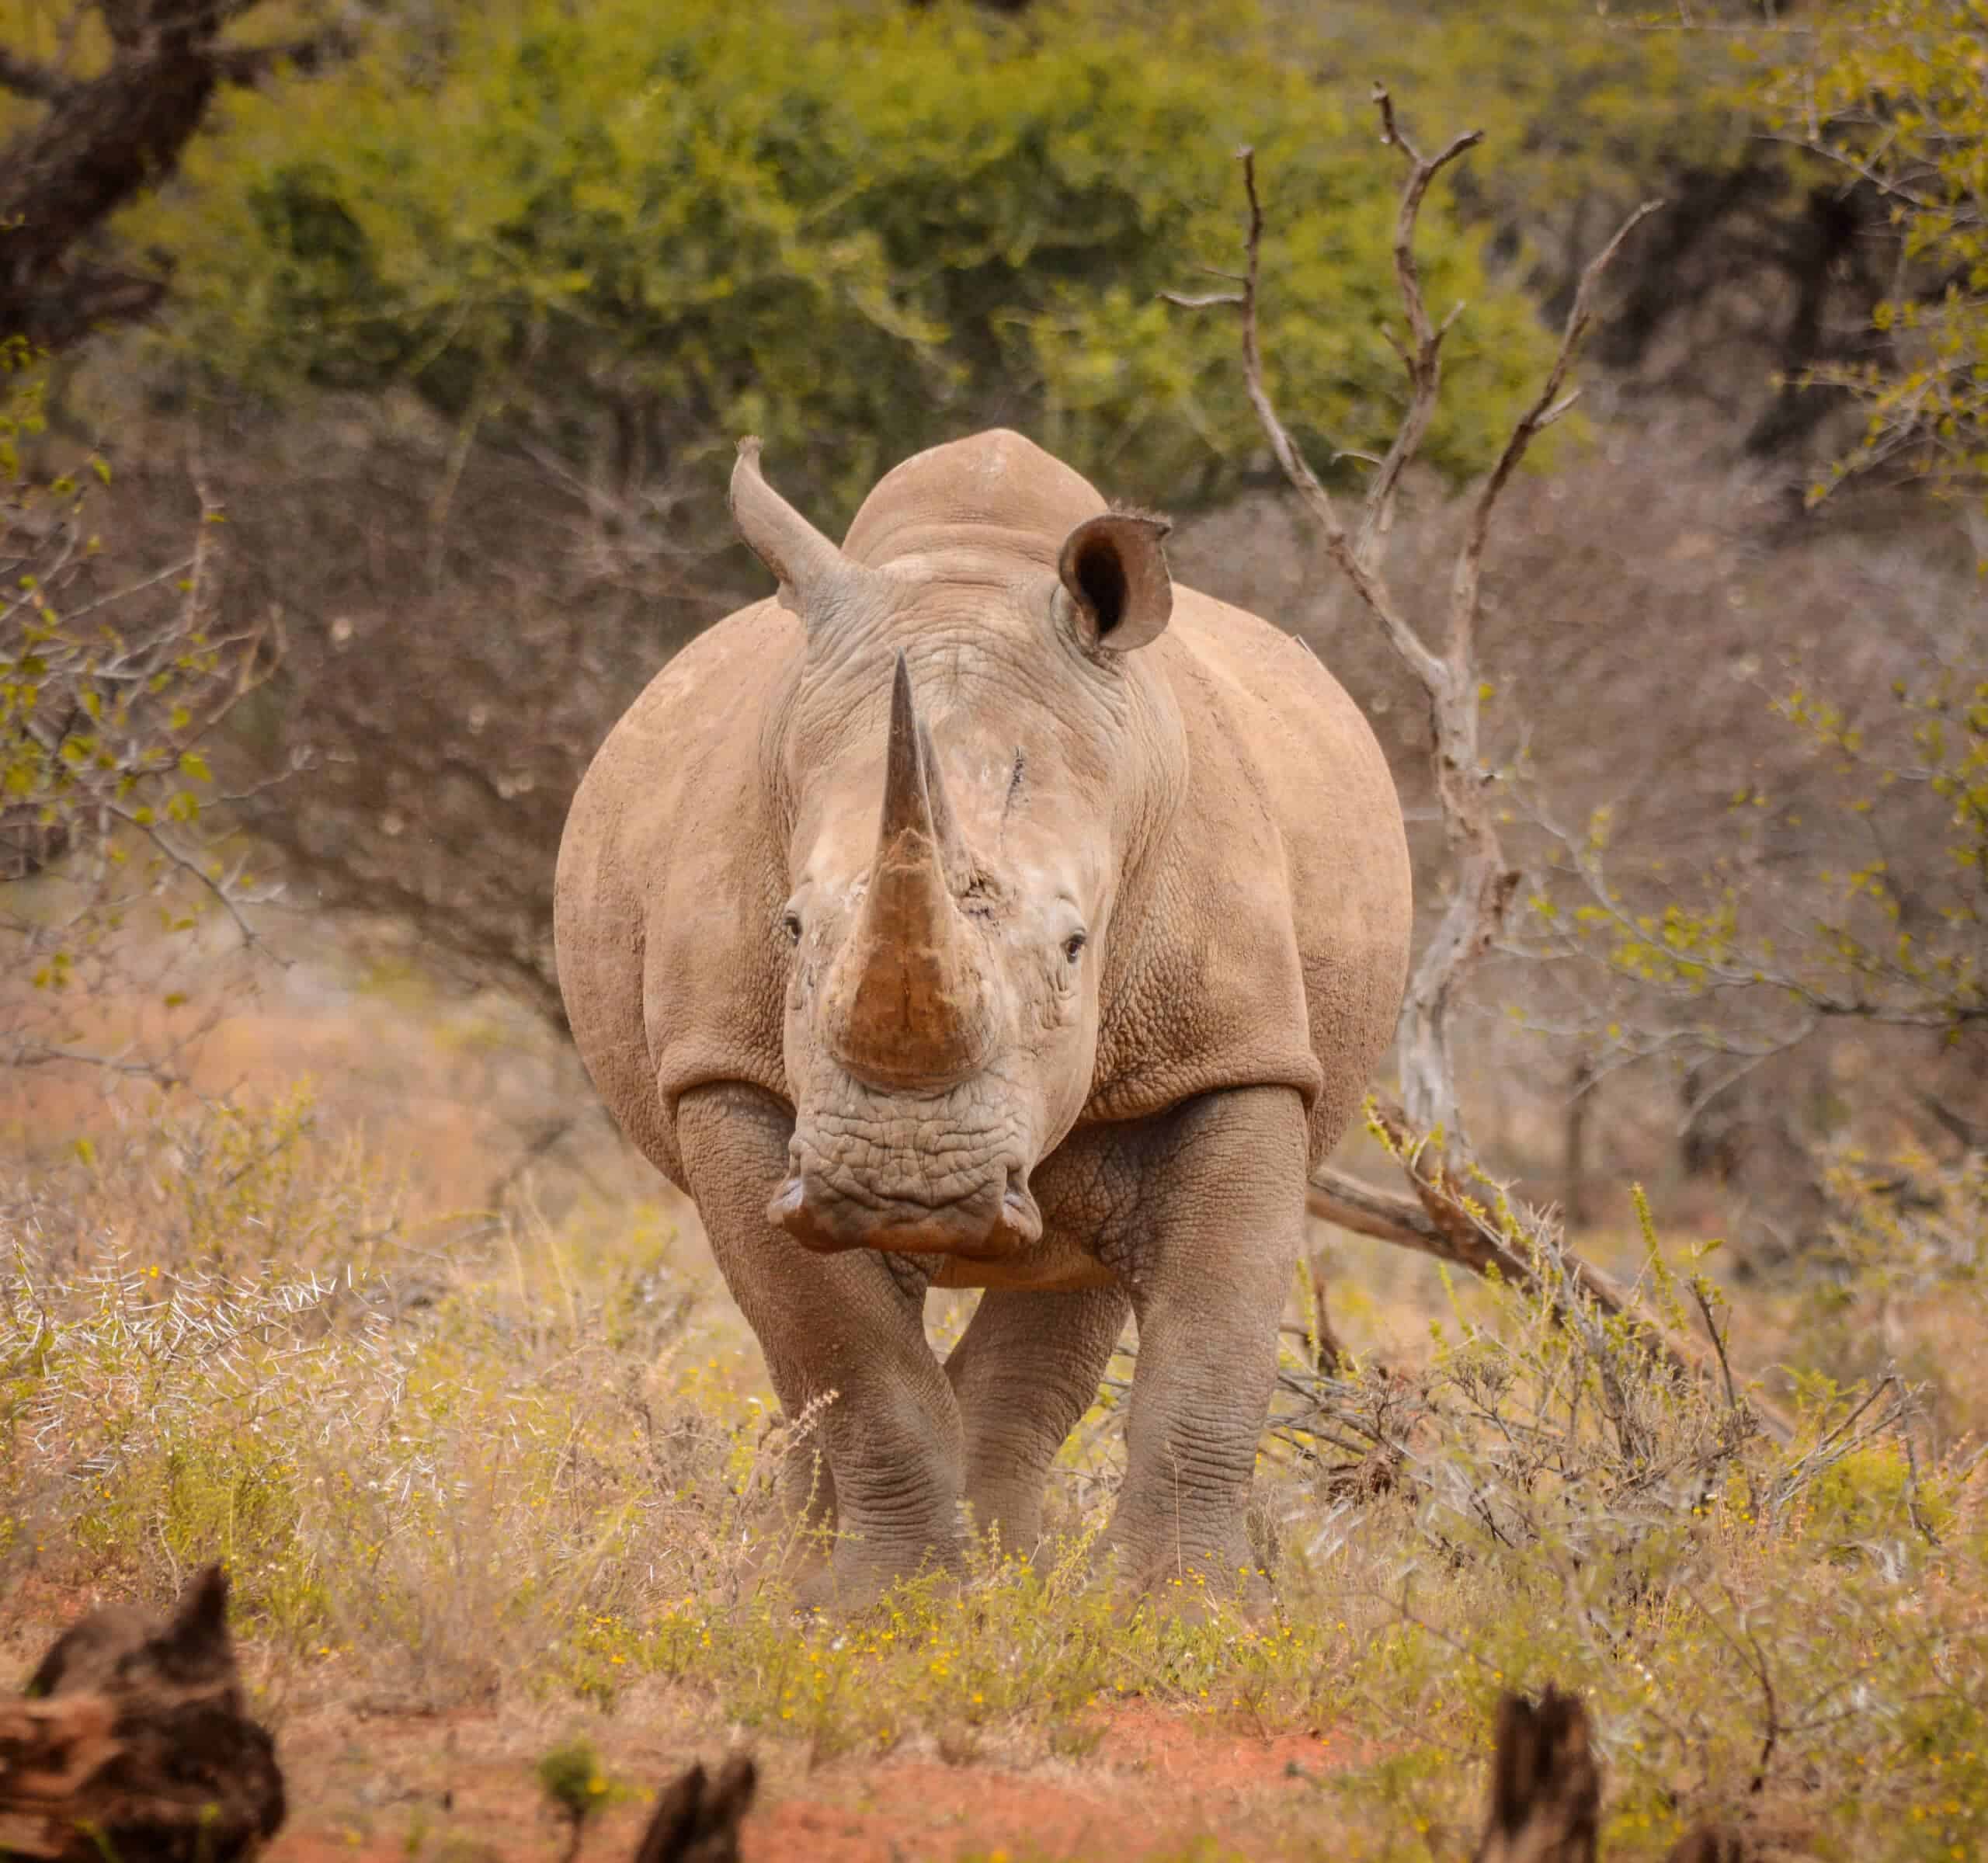 <p>Focal points of rhino populations are the Kaziranga National Park in India and the Chitwan National Park in Nepal. The tank rhinoceros can be seen in Berlin, Munich, and Nuremberg zoos.</p> <p>A rhino species that live in Northern India and Nepal. There are still 2,000 to 3,000 animals in the wild, most of them in Indian national parks. About 500 specimens of this species live in Nepal. The populations in the national parks have been increasing again in recent years. </p>           Sharks, lions, tigers, as well as all about cats & dogs!           <a href='https://www.msn.com/en-us/channel/source/Animals%20Around%20The%20Globe%20US/sr-vid-ryujycftmyx7d7tmb5trkya28raxe6r56iuty5739ky2rf5d5wws?ocid=anaheim-ntp-following&cvid=1ff21e393be1475a8b3dd9a83a86b8df&ei=10'>           Click here to get to the Animals Around The Globe profile page</a><b> and hit "Follow" to never miss out.</b>